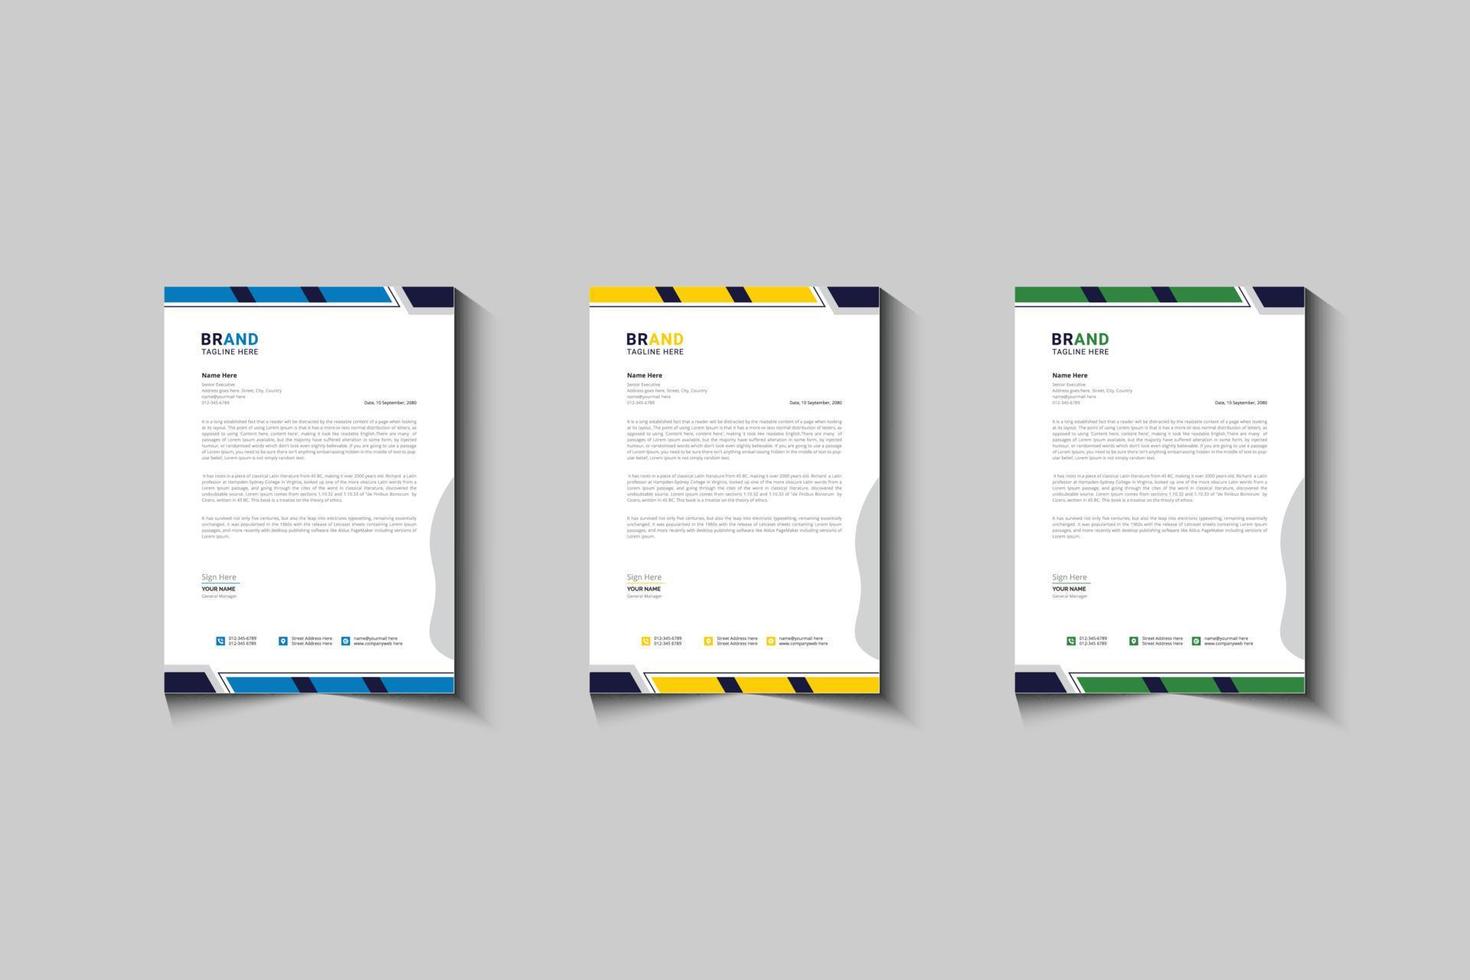 Modern and Professional business corporate stylish letterhead design template vector